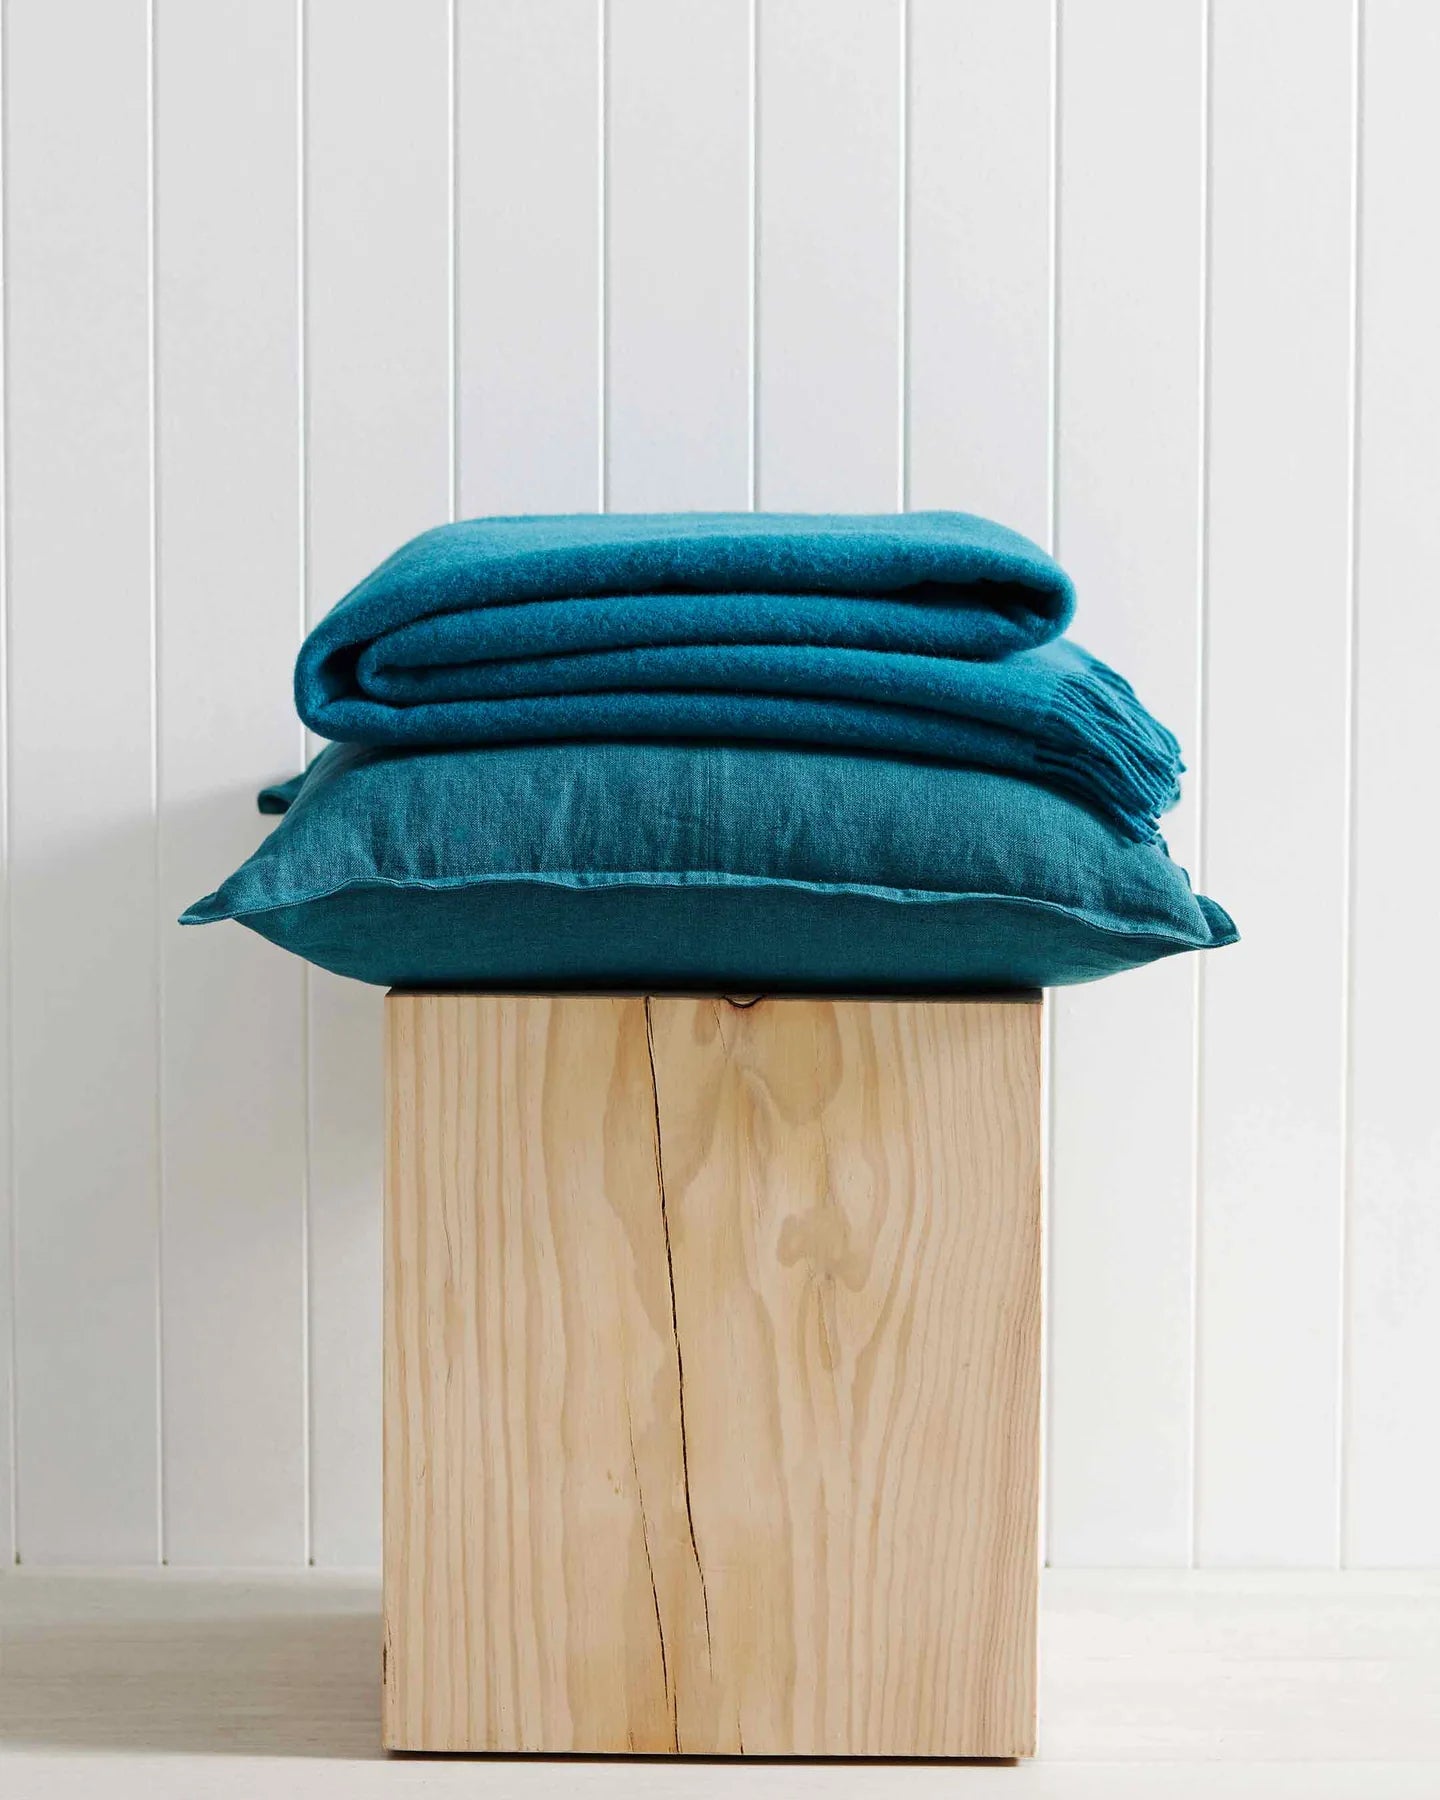 Made from 100% New Zealand lambswool, Nevis throw blankets in turquoise are simply luxurious. All of our throws make the perfect companion over cooler days and nights, and can also be enjoyed outdoors